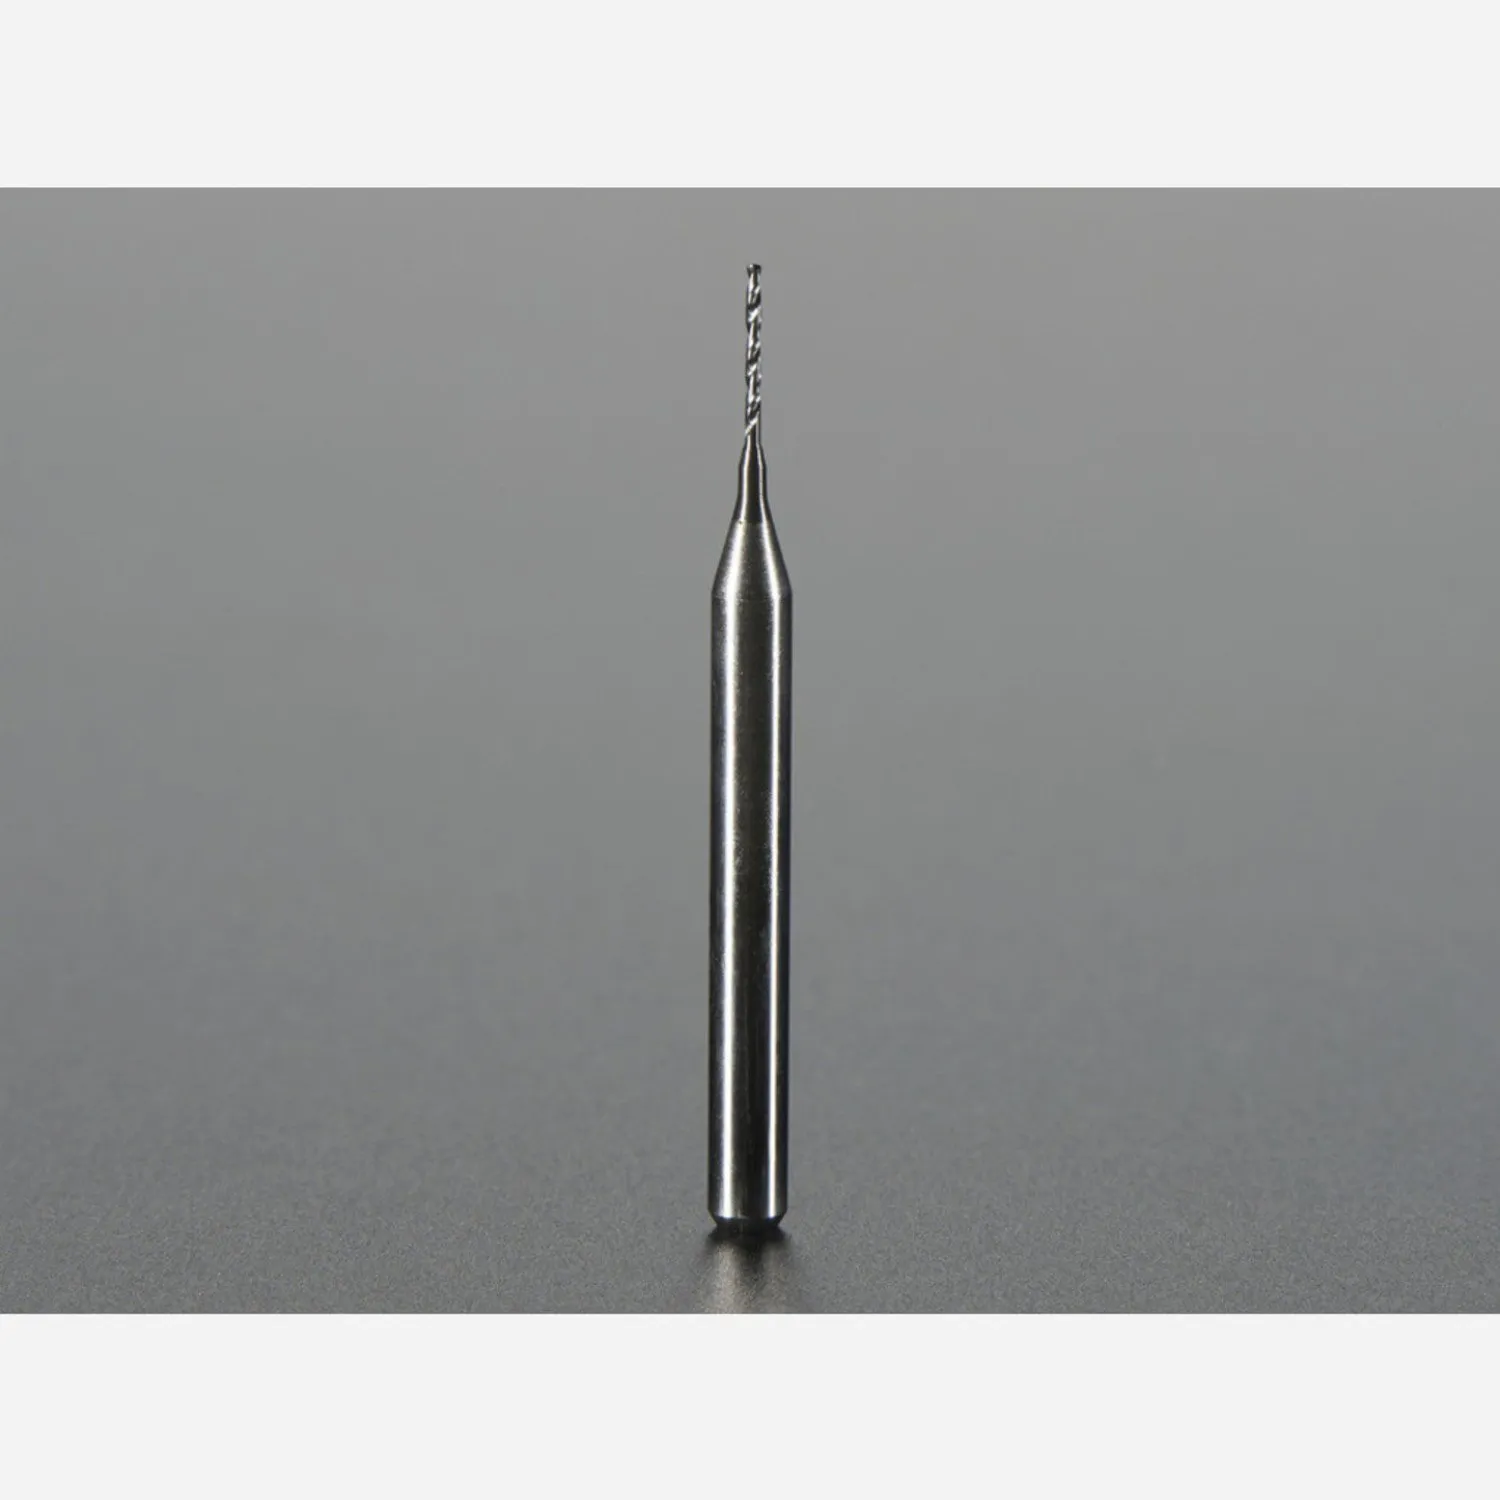 Photo of Carbide Square End Mill - 1/8 Shaft - 0.6mm Diameter